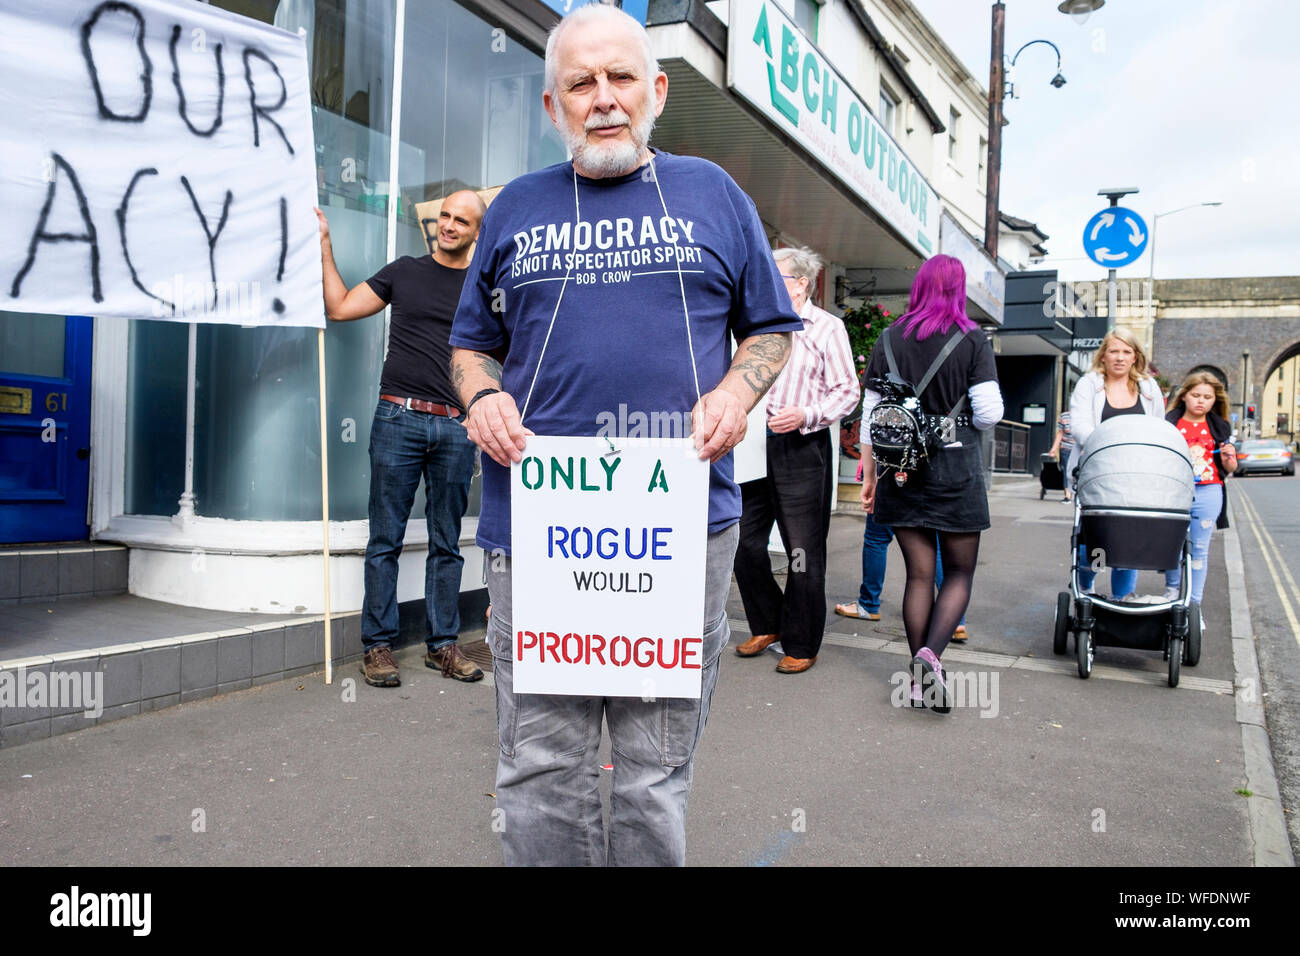 Chippenham, Wiltshire, UK. 31 August, 2019. A protester holding an anti prorogue sign is pictured as he protests outside the Chippenham offices of Michelle Donelan, the Conservative MP for Chippenham. The protest against Boris Johnson's decision to prorogue Parliament was organised by the Chippenham constituency Labour Party. Credit: Lynchpics/Alamy Live News Stock Photo